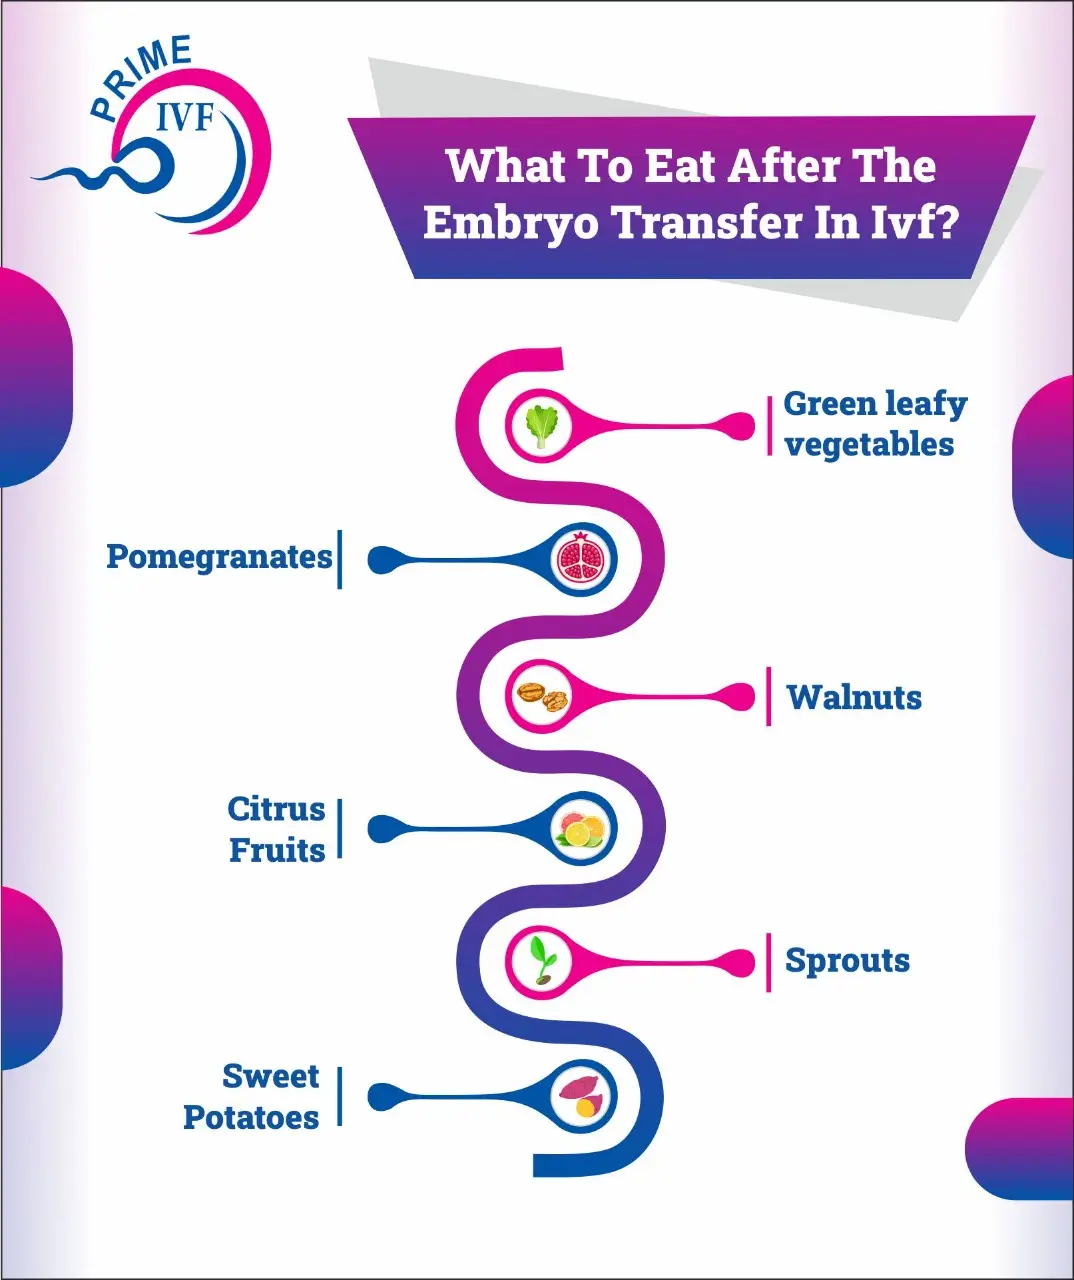 What to eat After Embryo Transfer in IVF